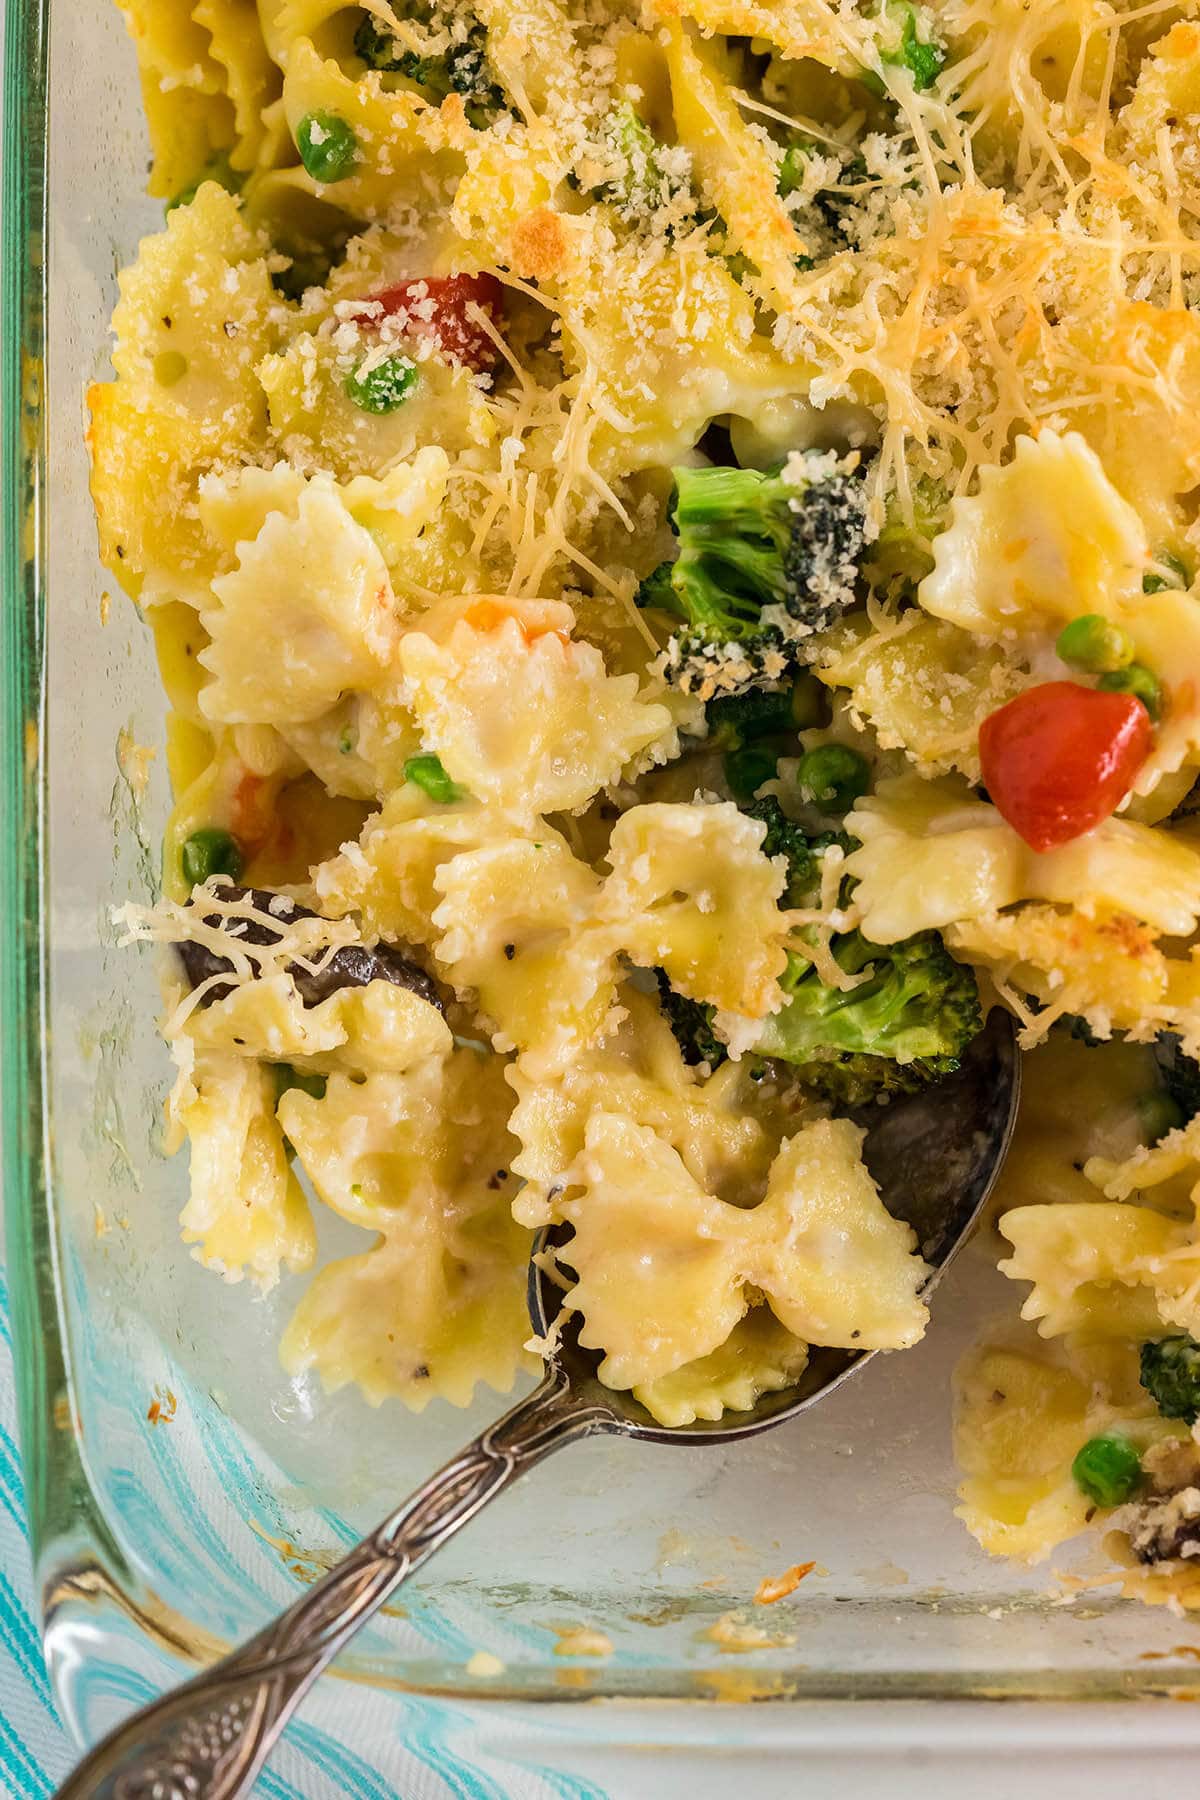 Casserole Dish filled with Creamy Pasta Primavera with serving spoon.